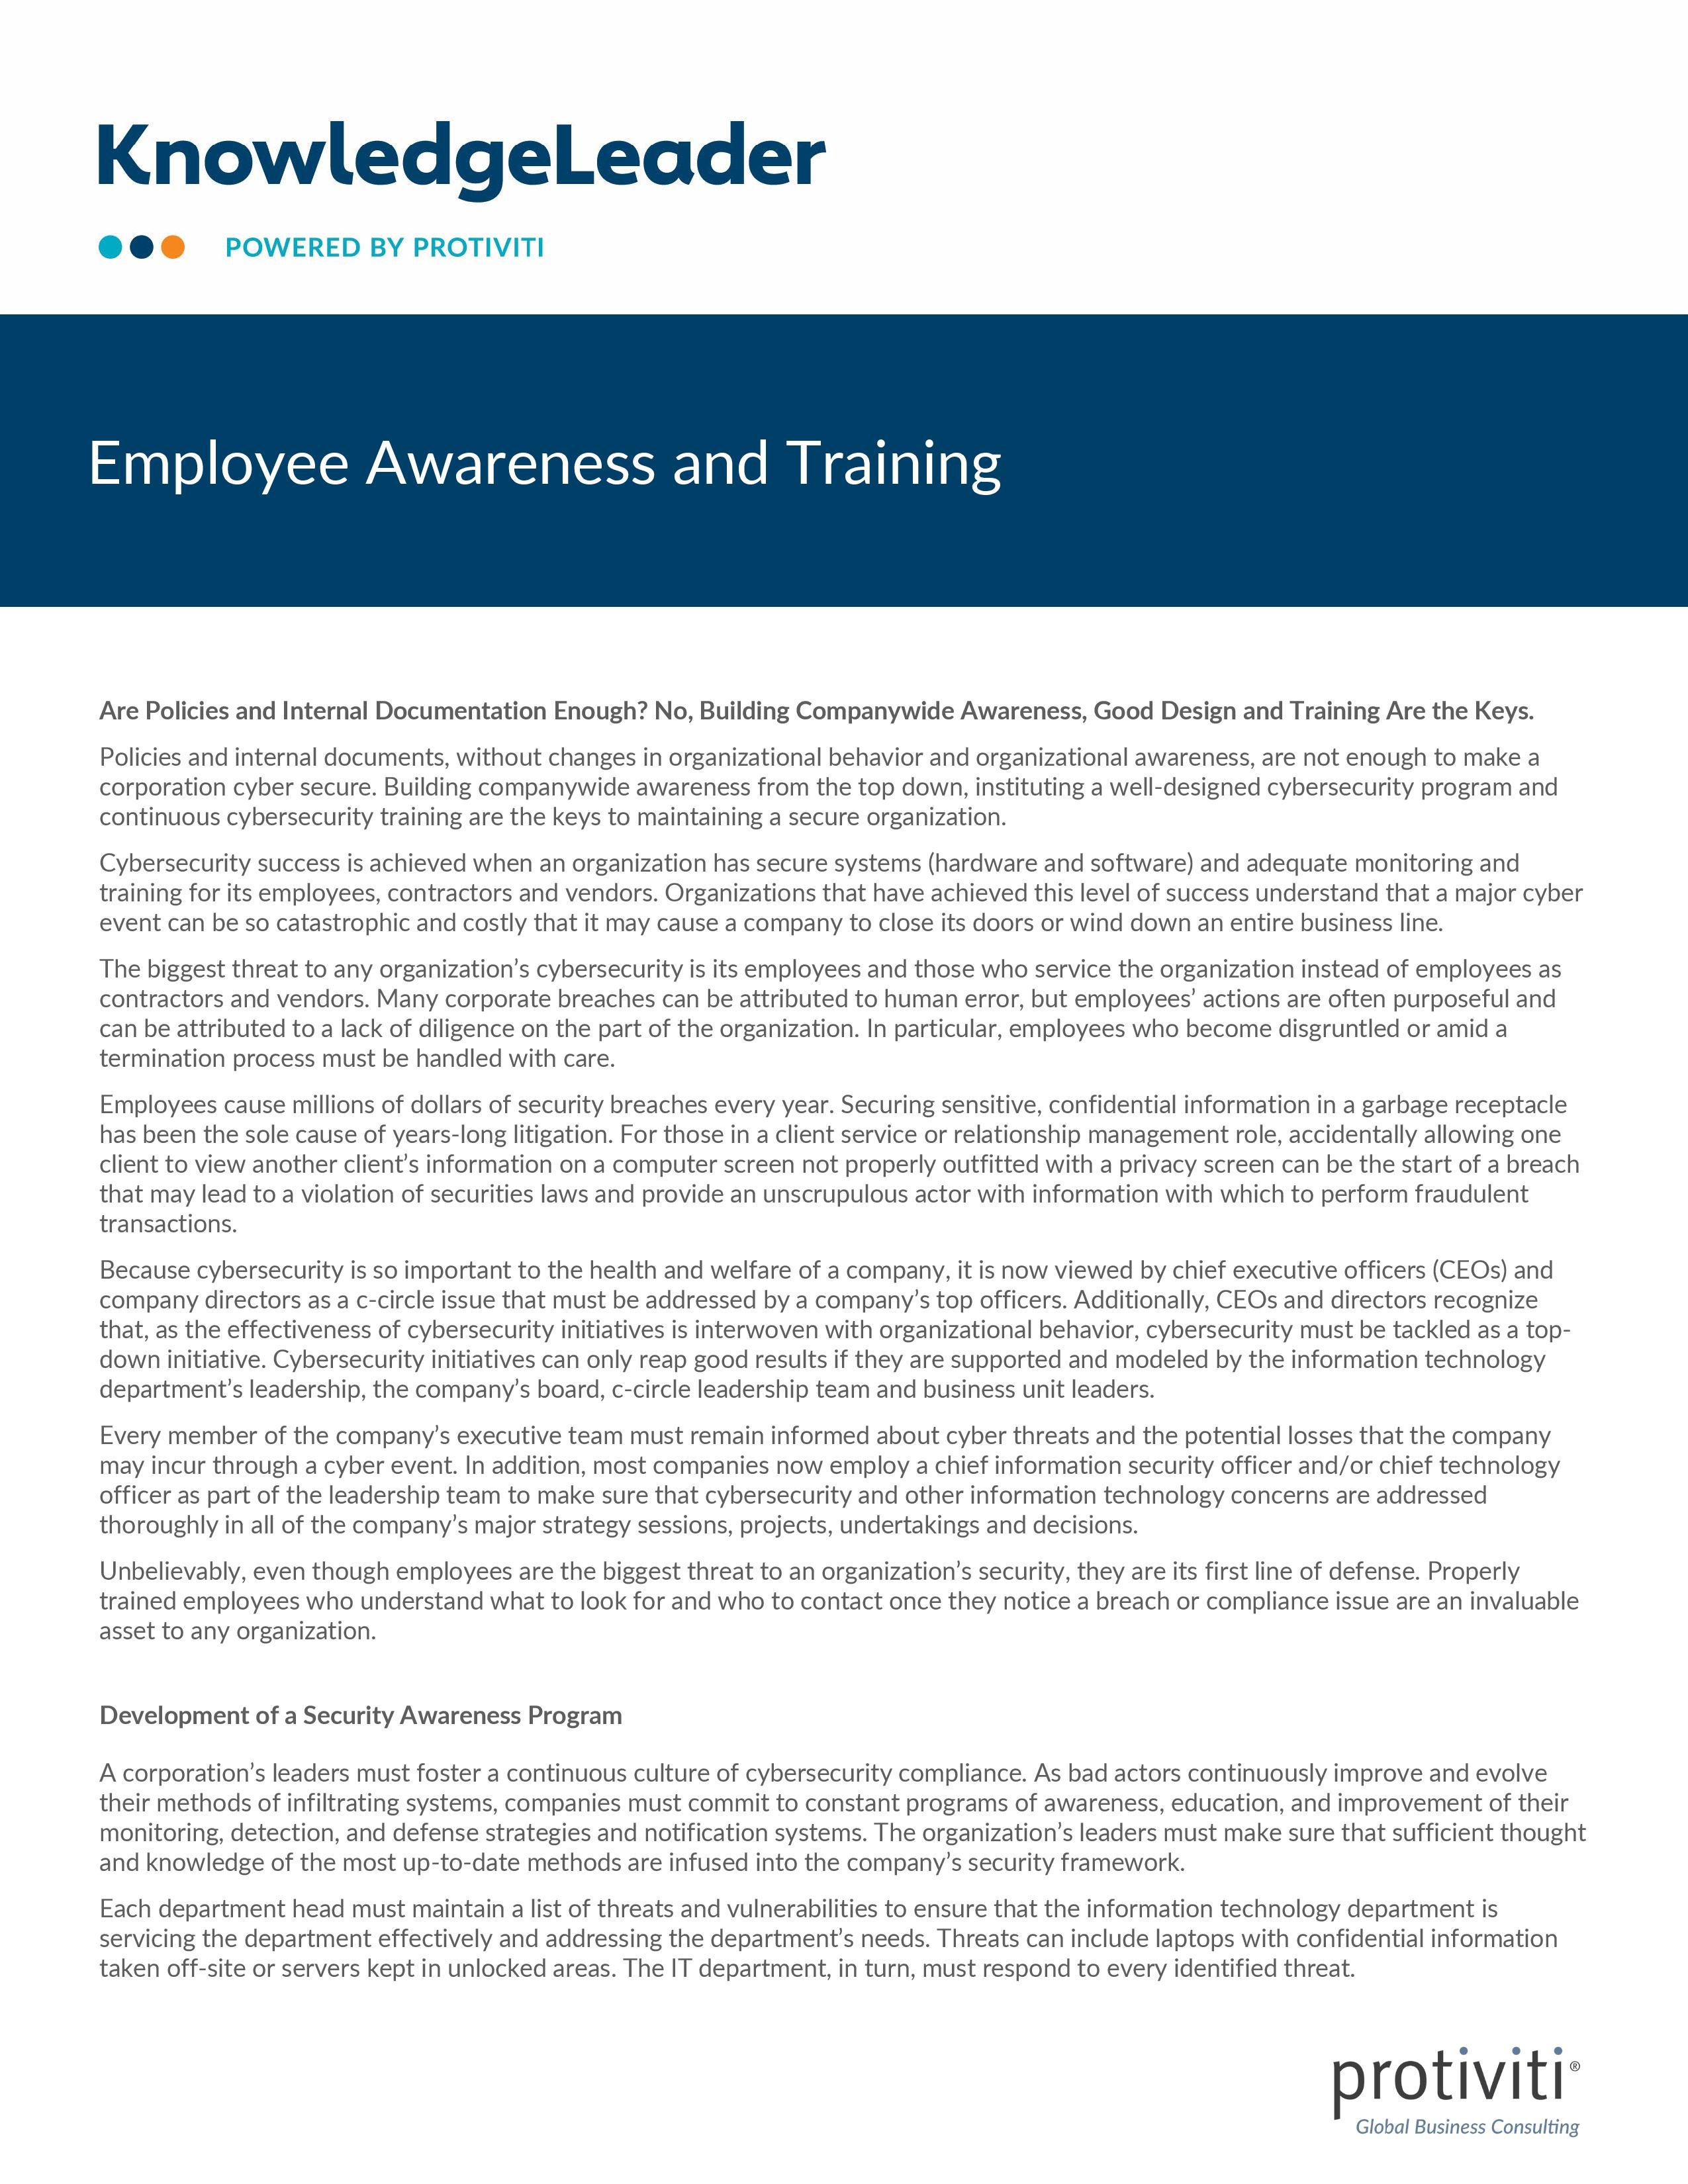 screenshot of the first page of Employee Awareness and Training